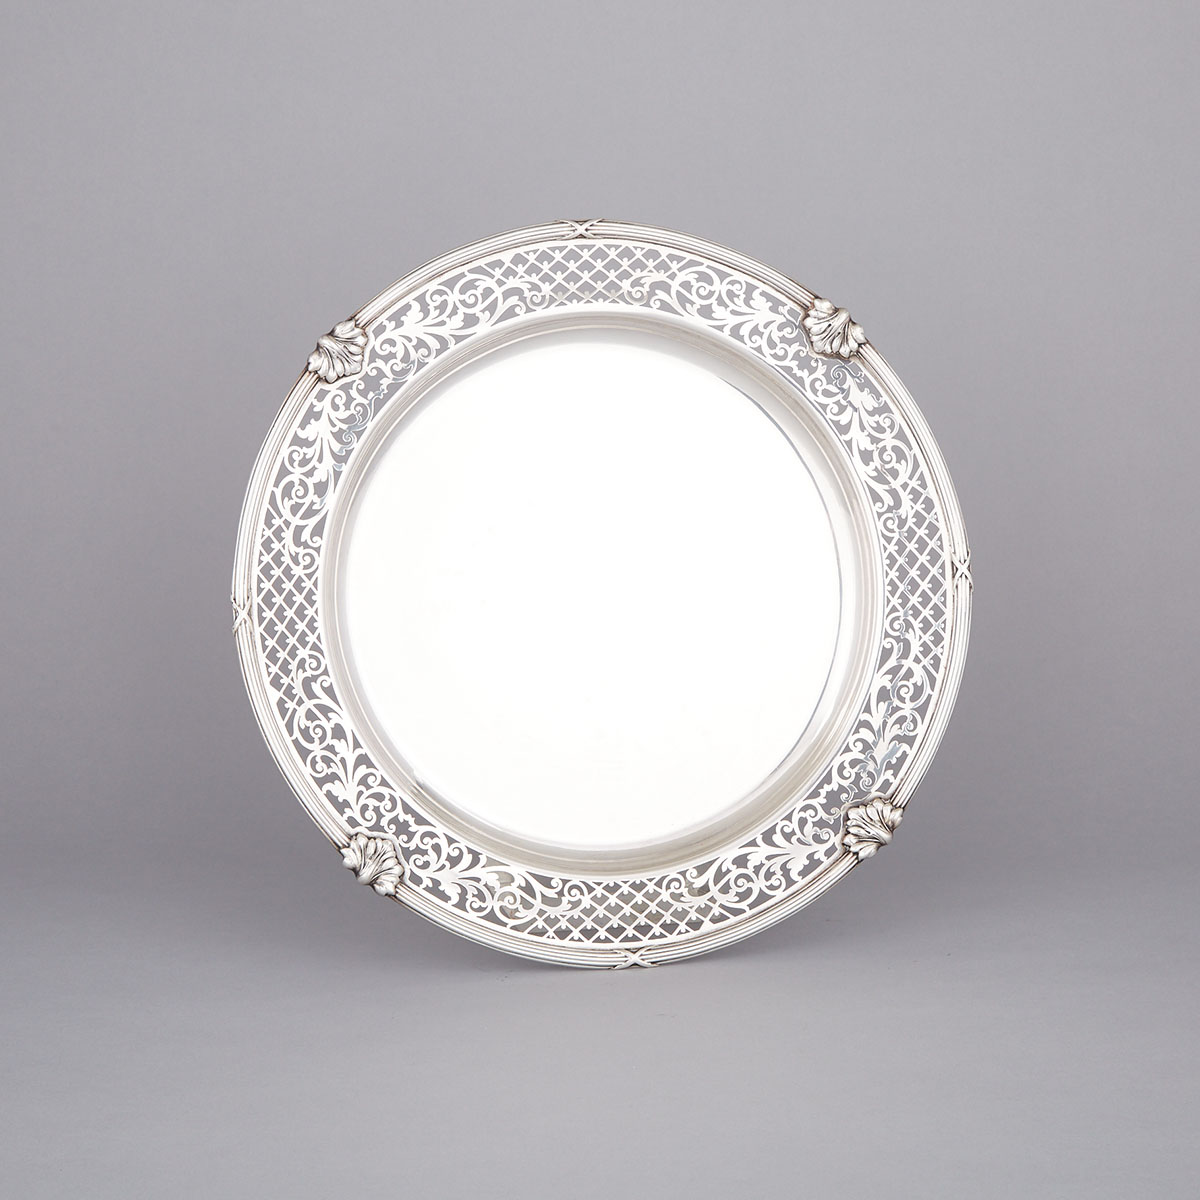 Canadian Silver Circular Pierced Serving Dish, Henry Birks & Sons, Montreal Que., 1927